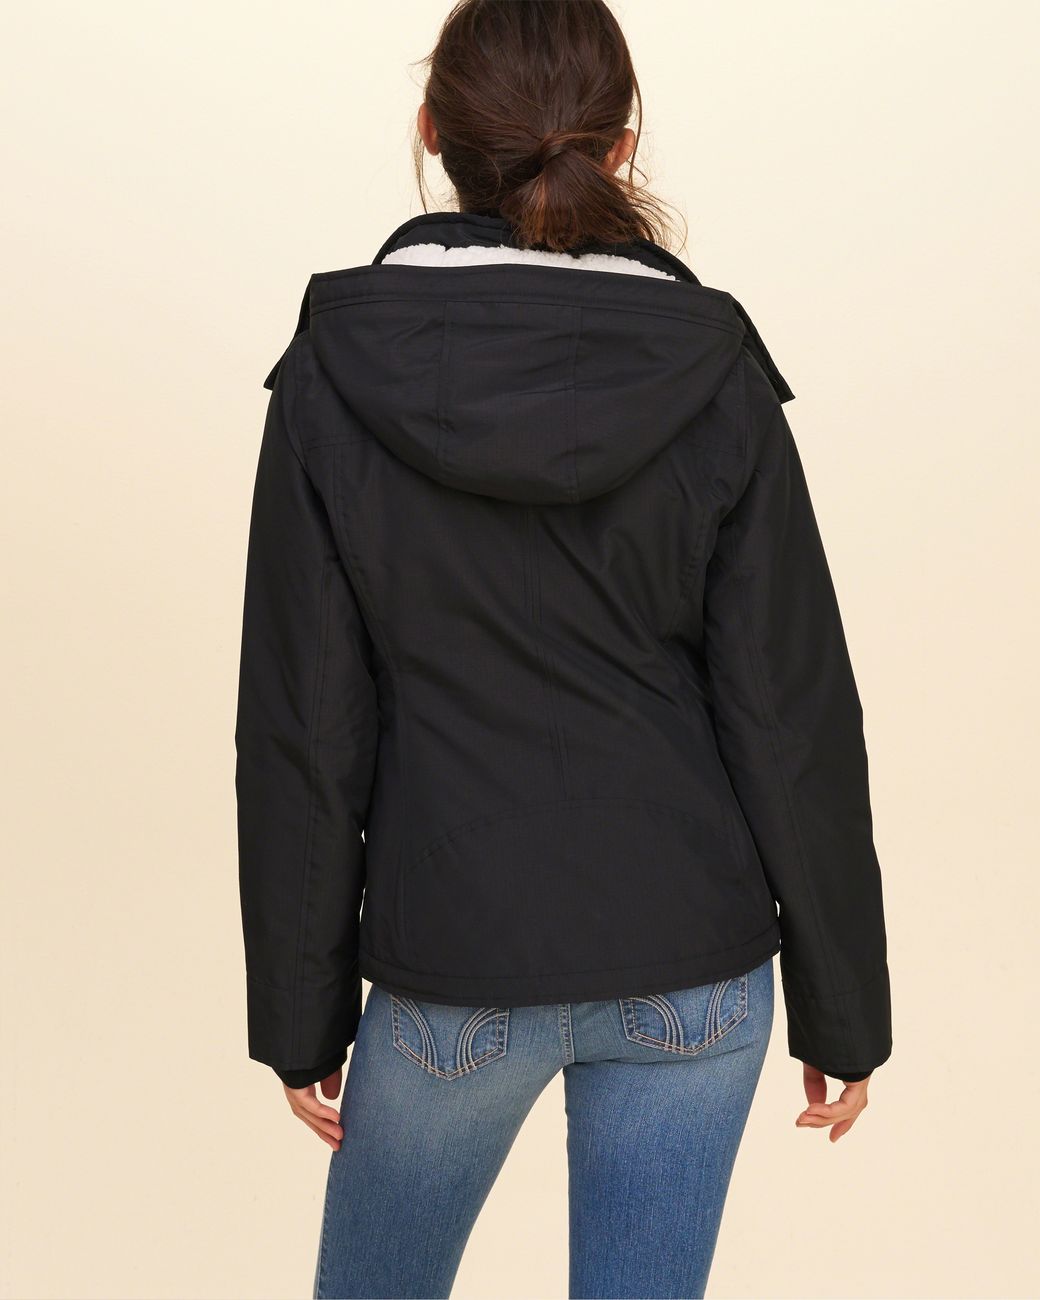 Hollister All-weather Sherpa Lined Jacket in Black | Lyst UK